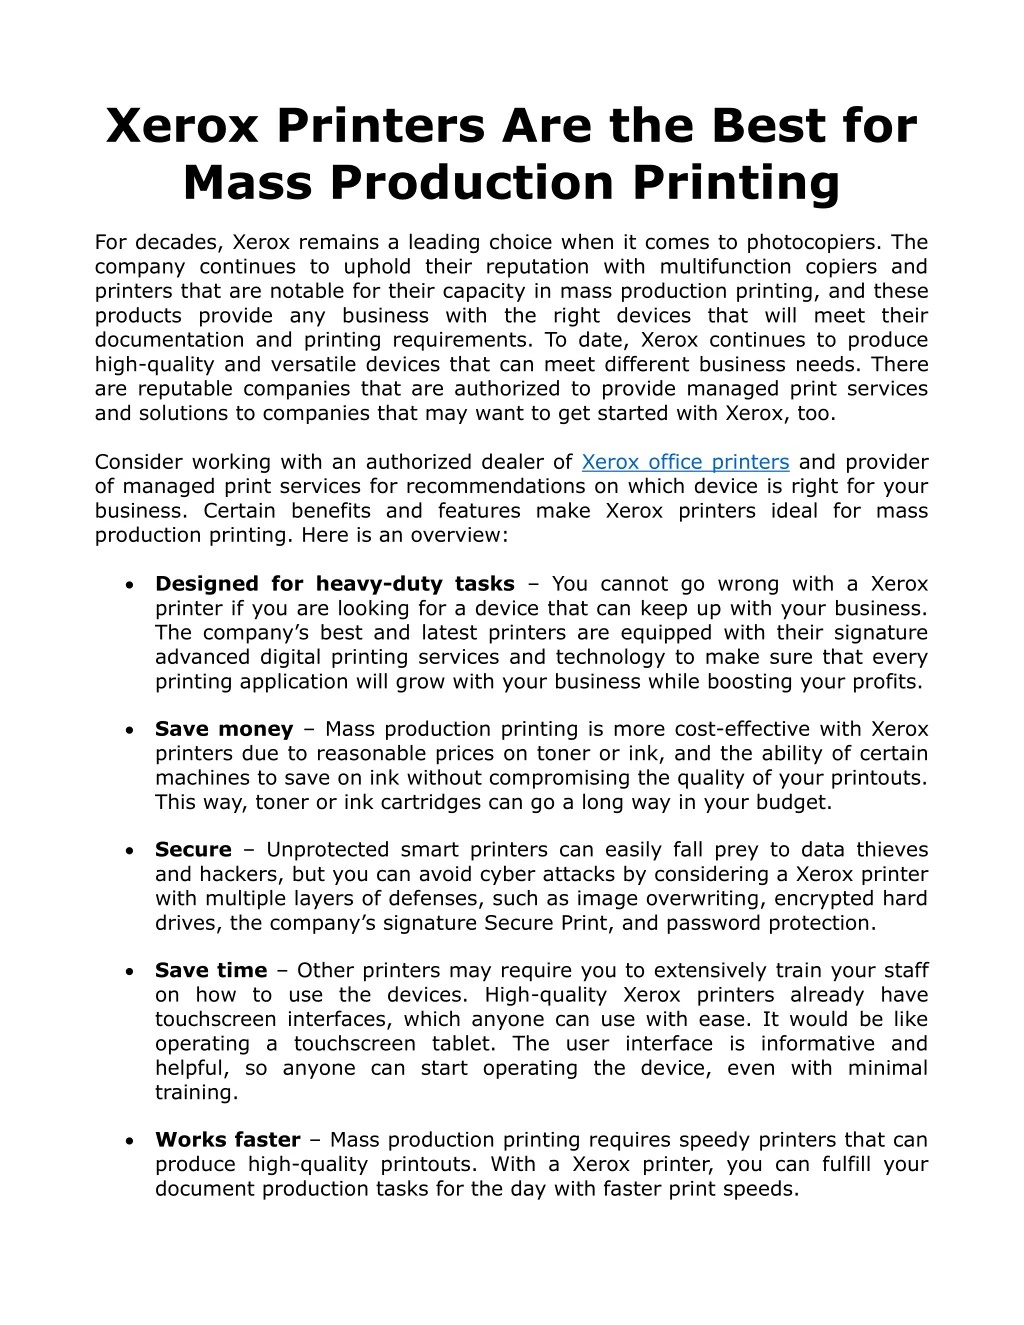 xerox printers are the best for mass production